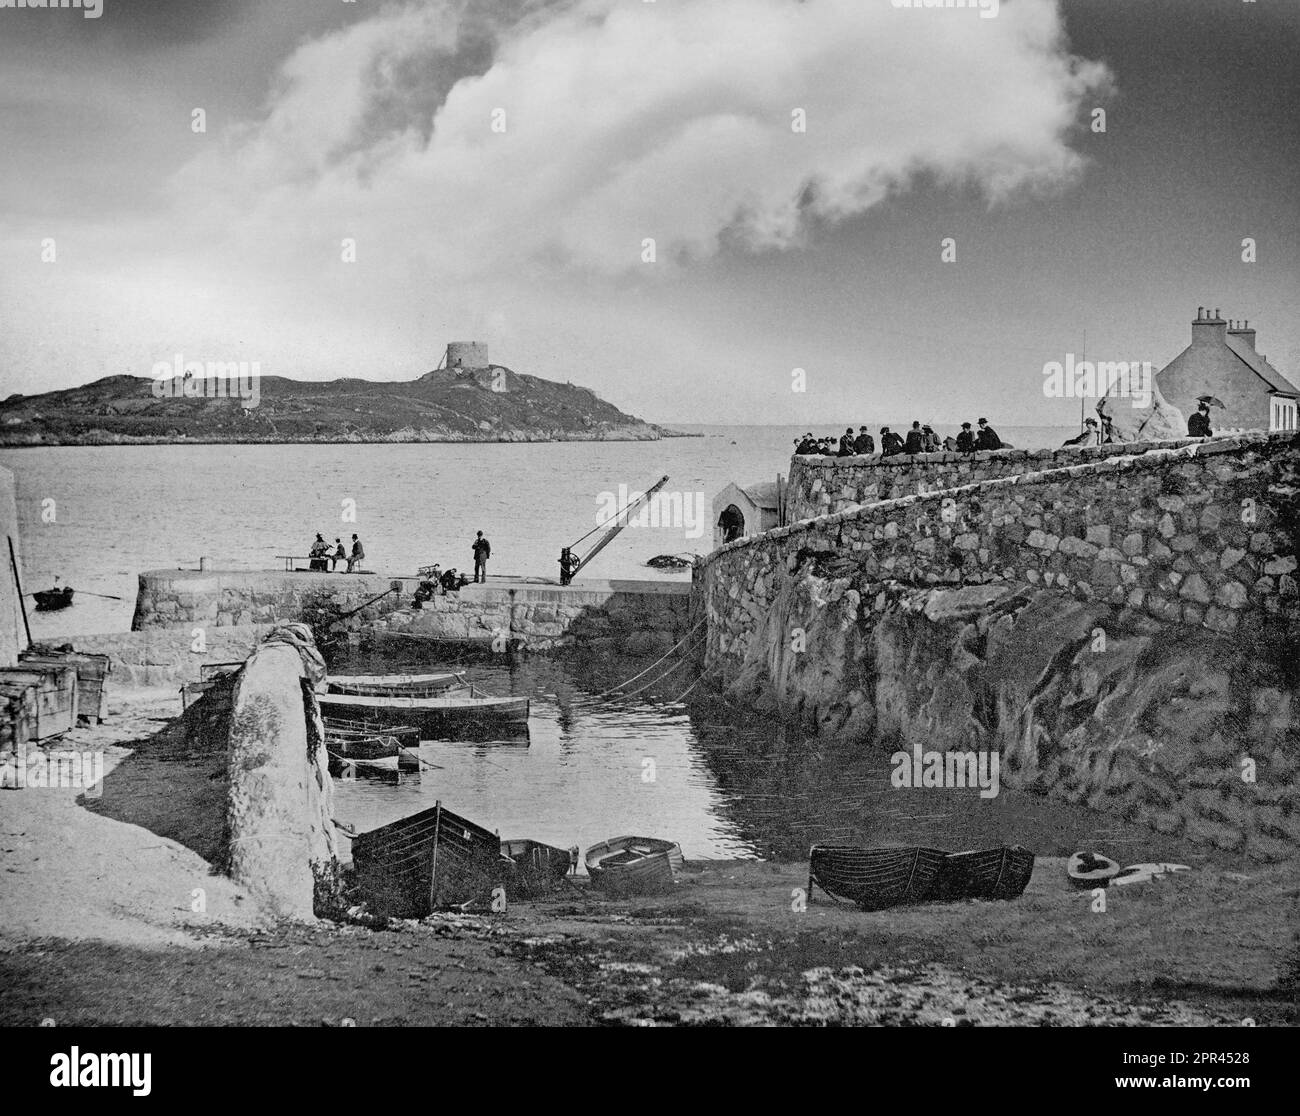 A late 19th century photograph of Coliemore Harbour, also known historically as Dalkey Harbour in County Dublin, Ireland. The harbour developed strategic value as a port for bulk shipments bound for Dublin during the 15th century. The channel between Dalkey Island with its Martello Tower and the mainland provided ideal conditions for unloading galleons carrying heavy cargo due to its depth (relative to Dublin Bay) and its sheltered position. The treacherous shallows of Dublin Bay prevented direct shipments into the city center, making Dalkey an ideal access point for trade. Stock Photo